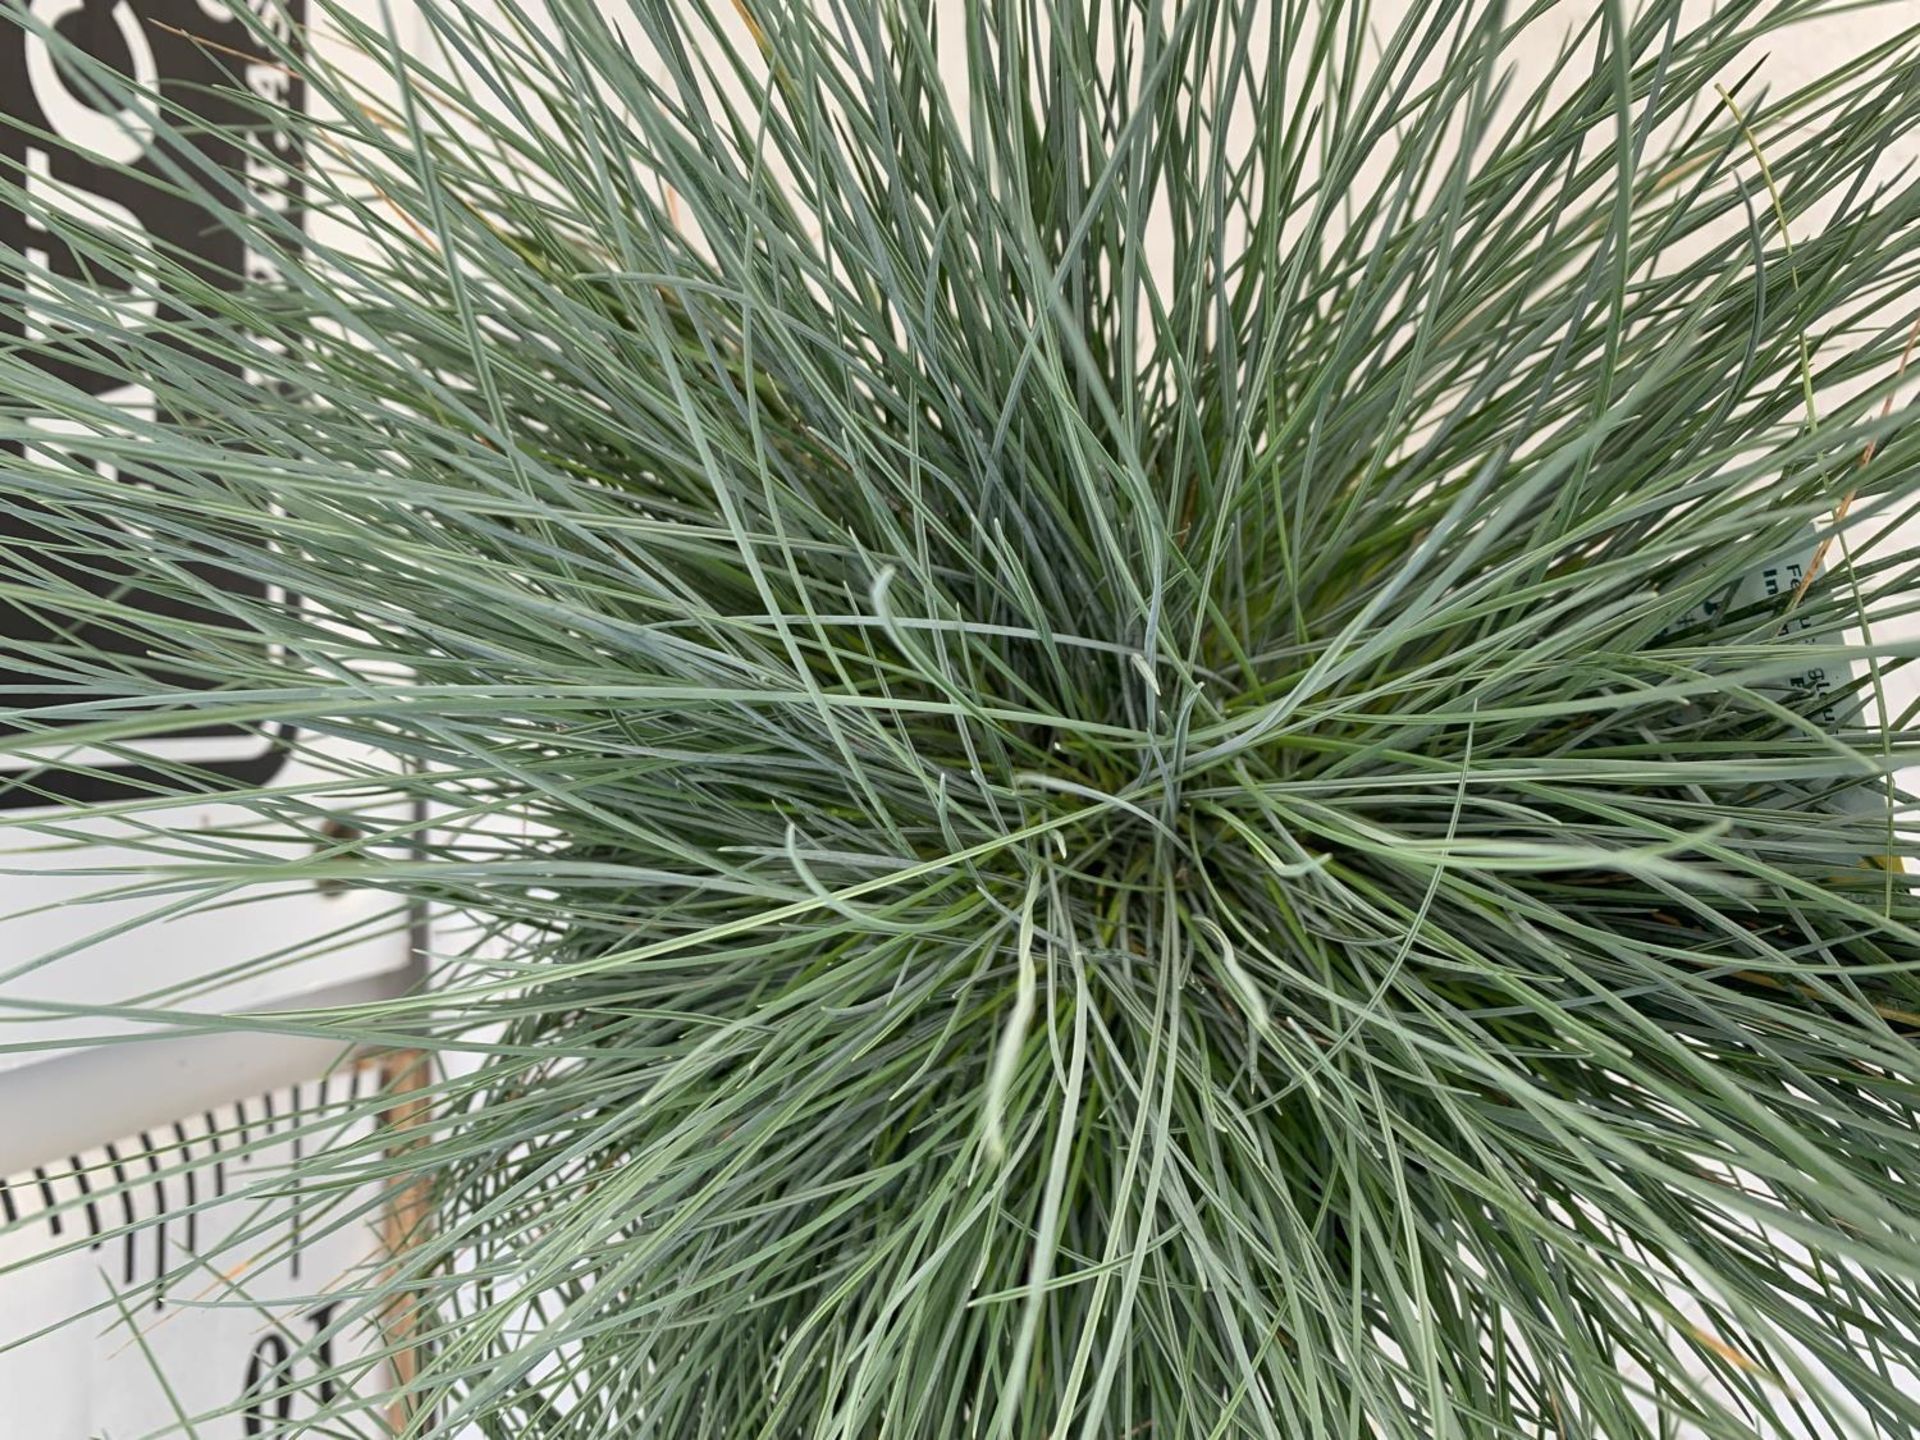 TWO FESTUCA GLAUCAINTENSE BLUE IN 2 LTR POTS 30CM TALL PLUS VAT TO BE SOLD FOR THE TWO - Image 10 of 10